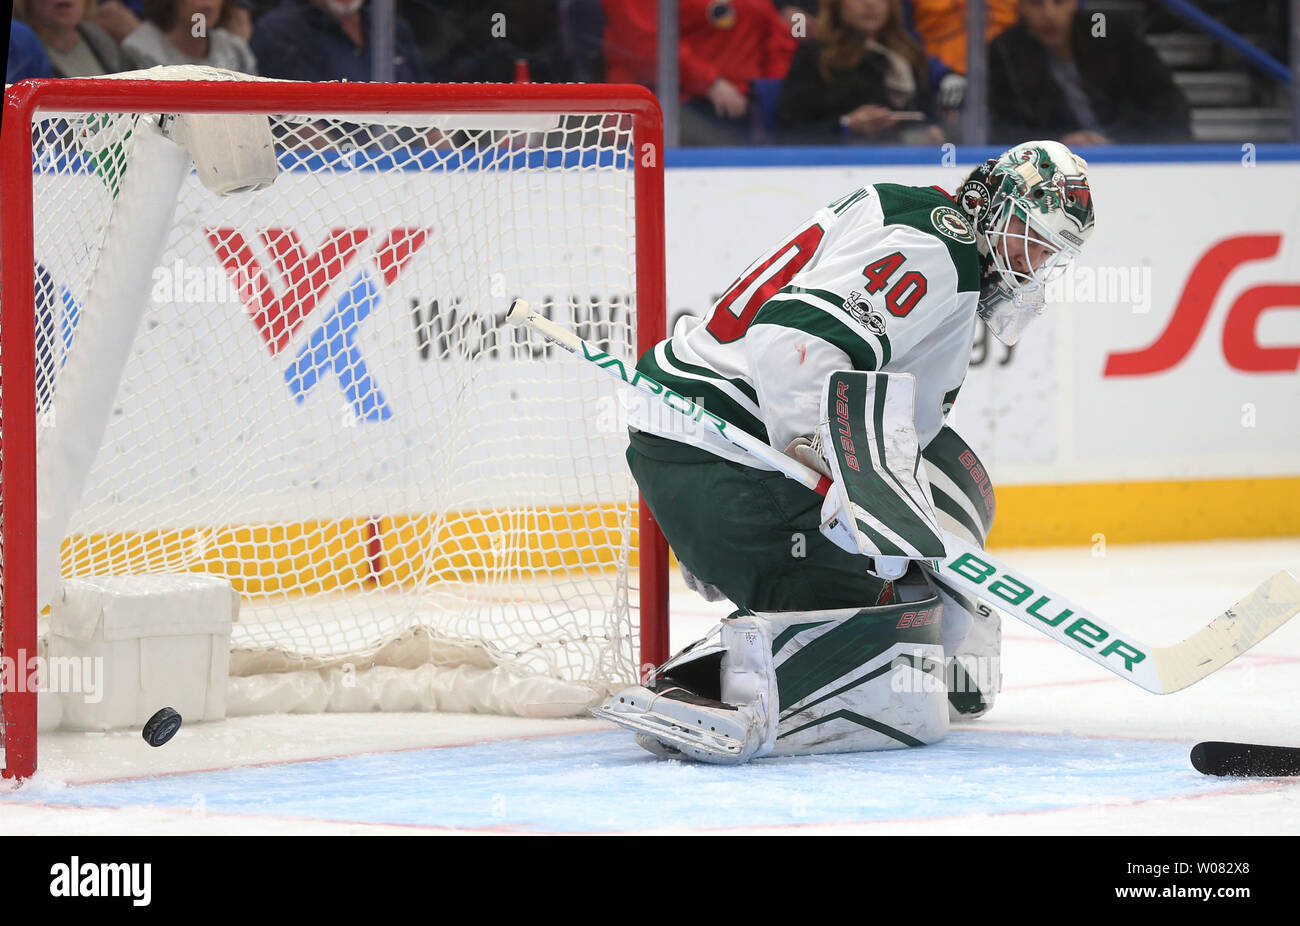 10-year-old St. Paul hockey player with rare condition impresses Devan  Dubnyk